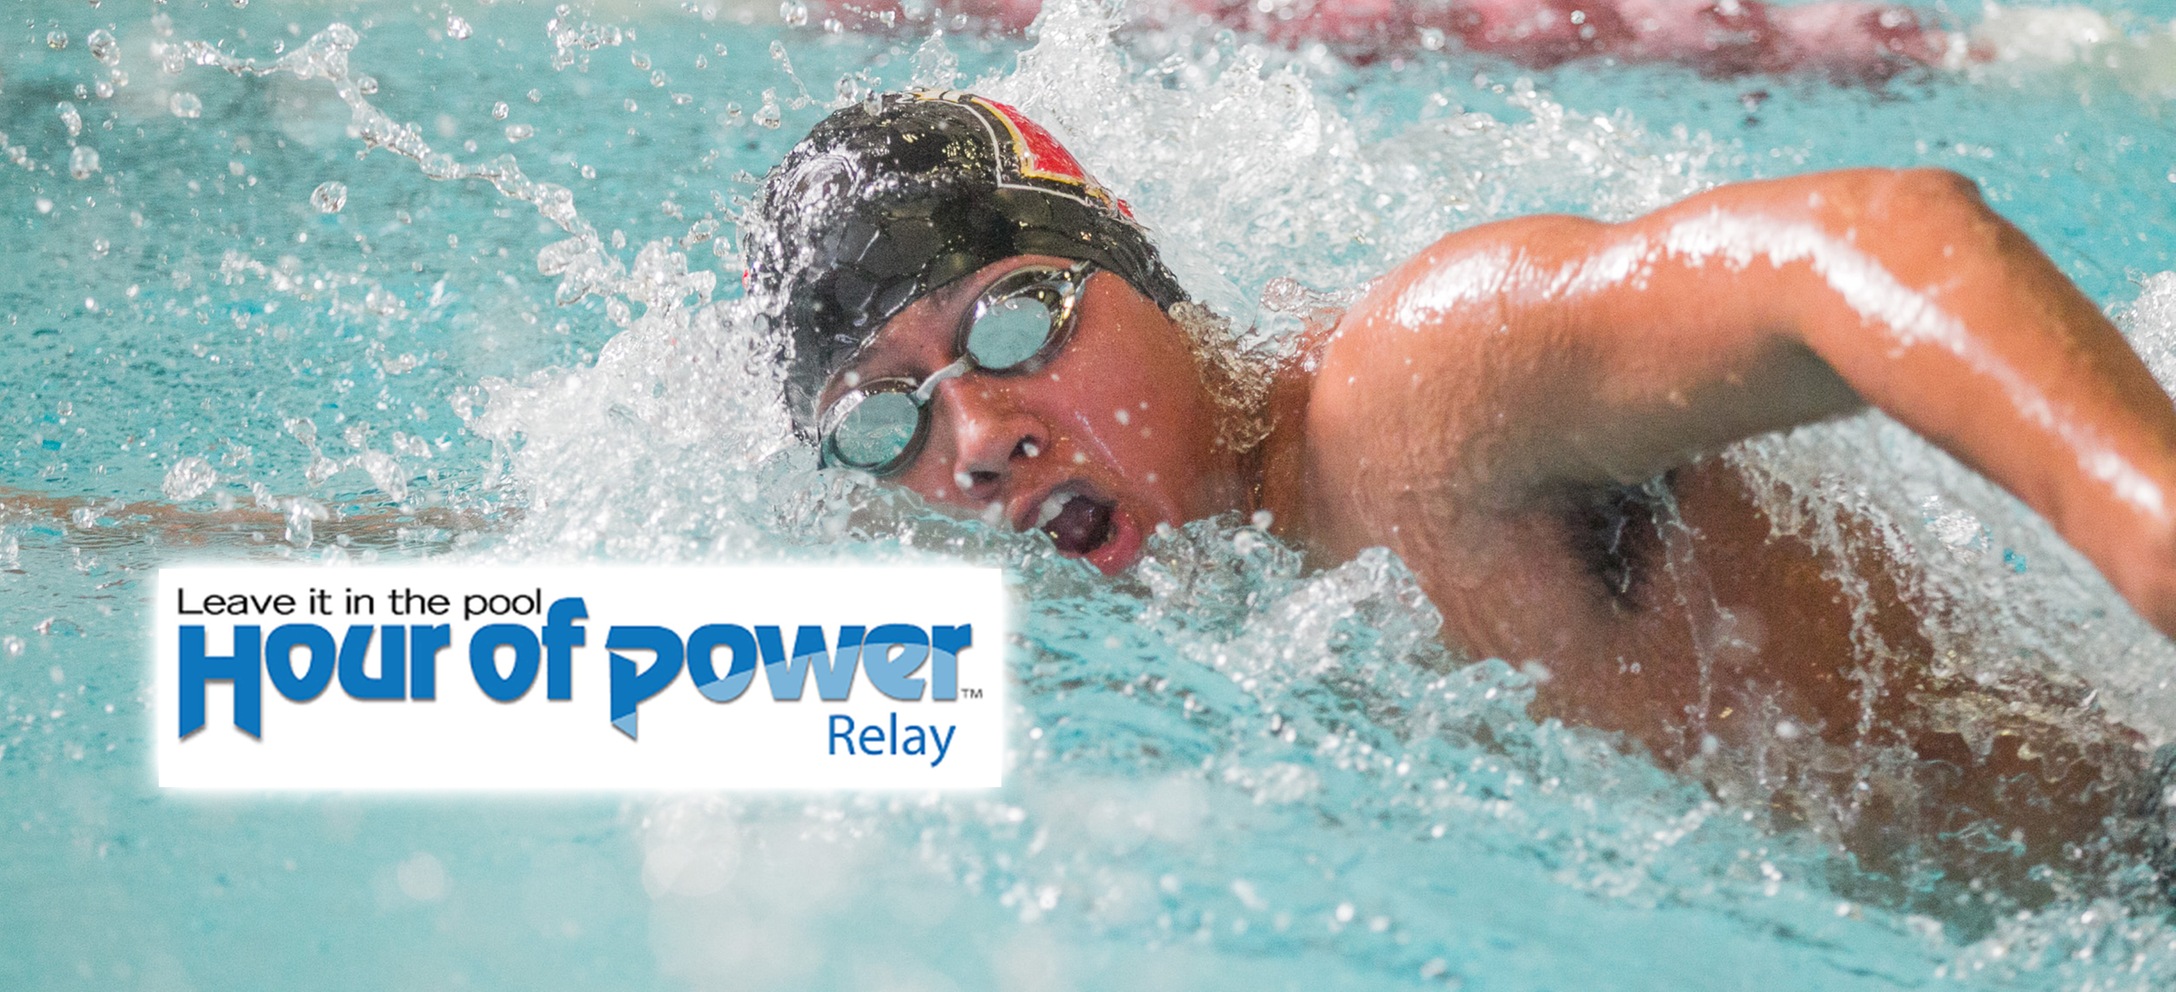 Swimming & Diving Takes Part in Hour of Power Relay for Sarcoma Research